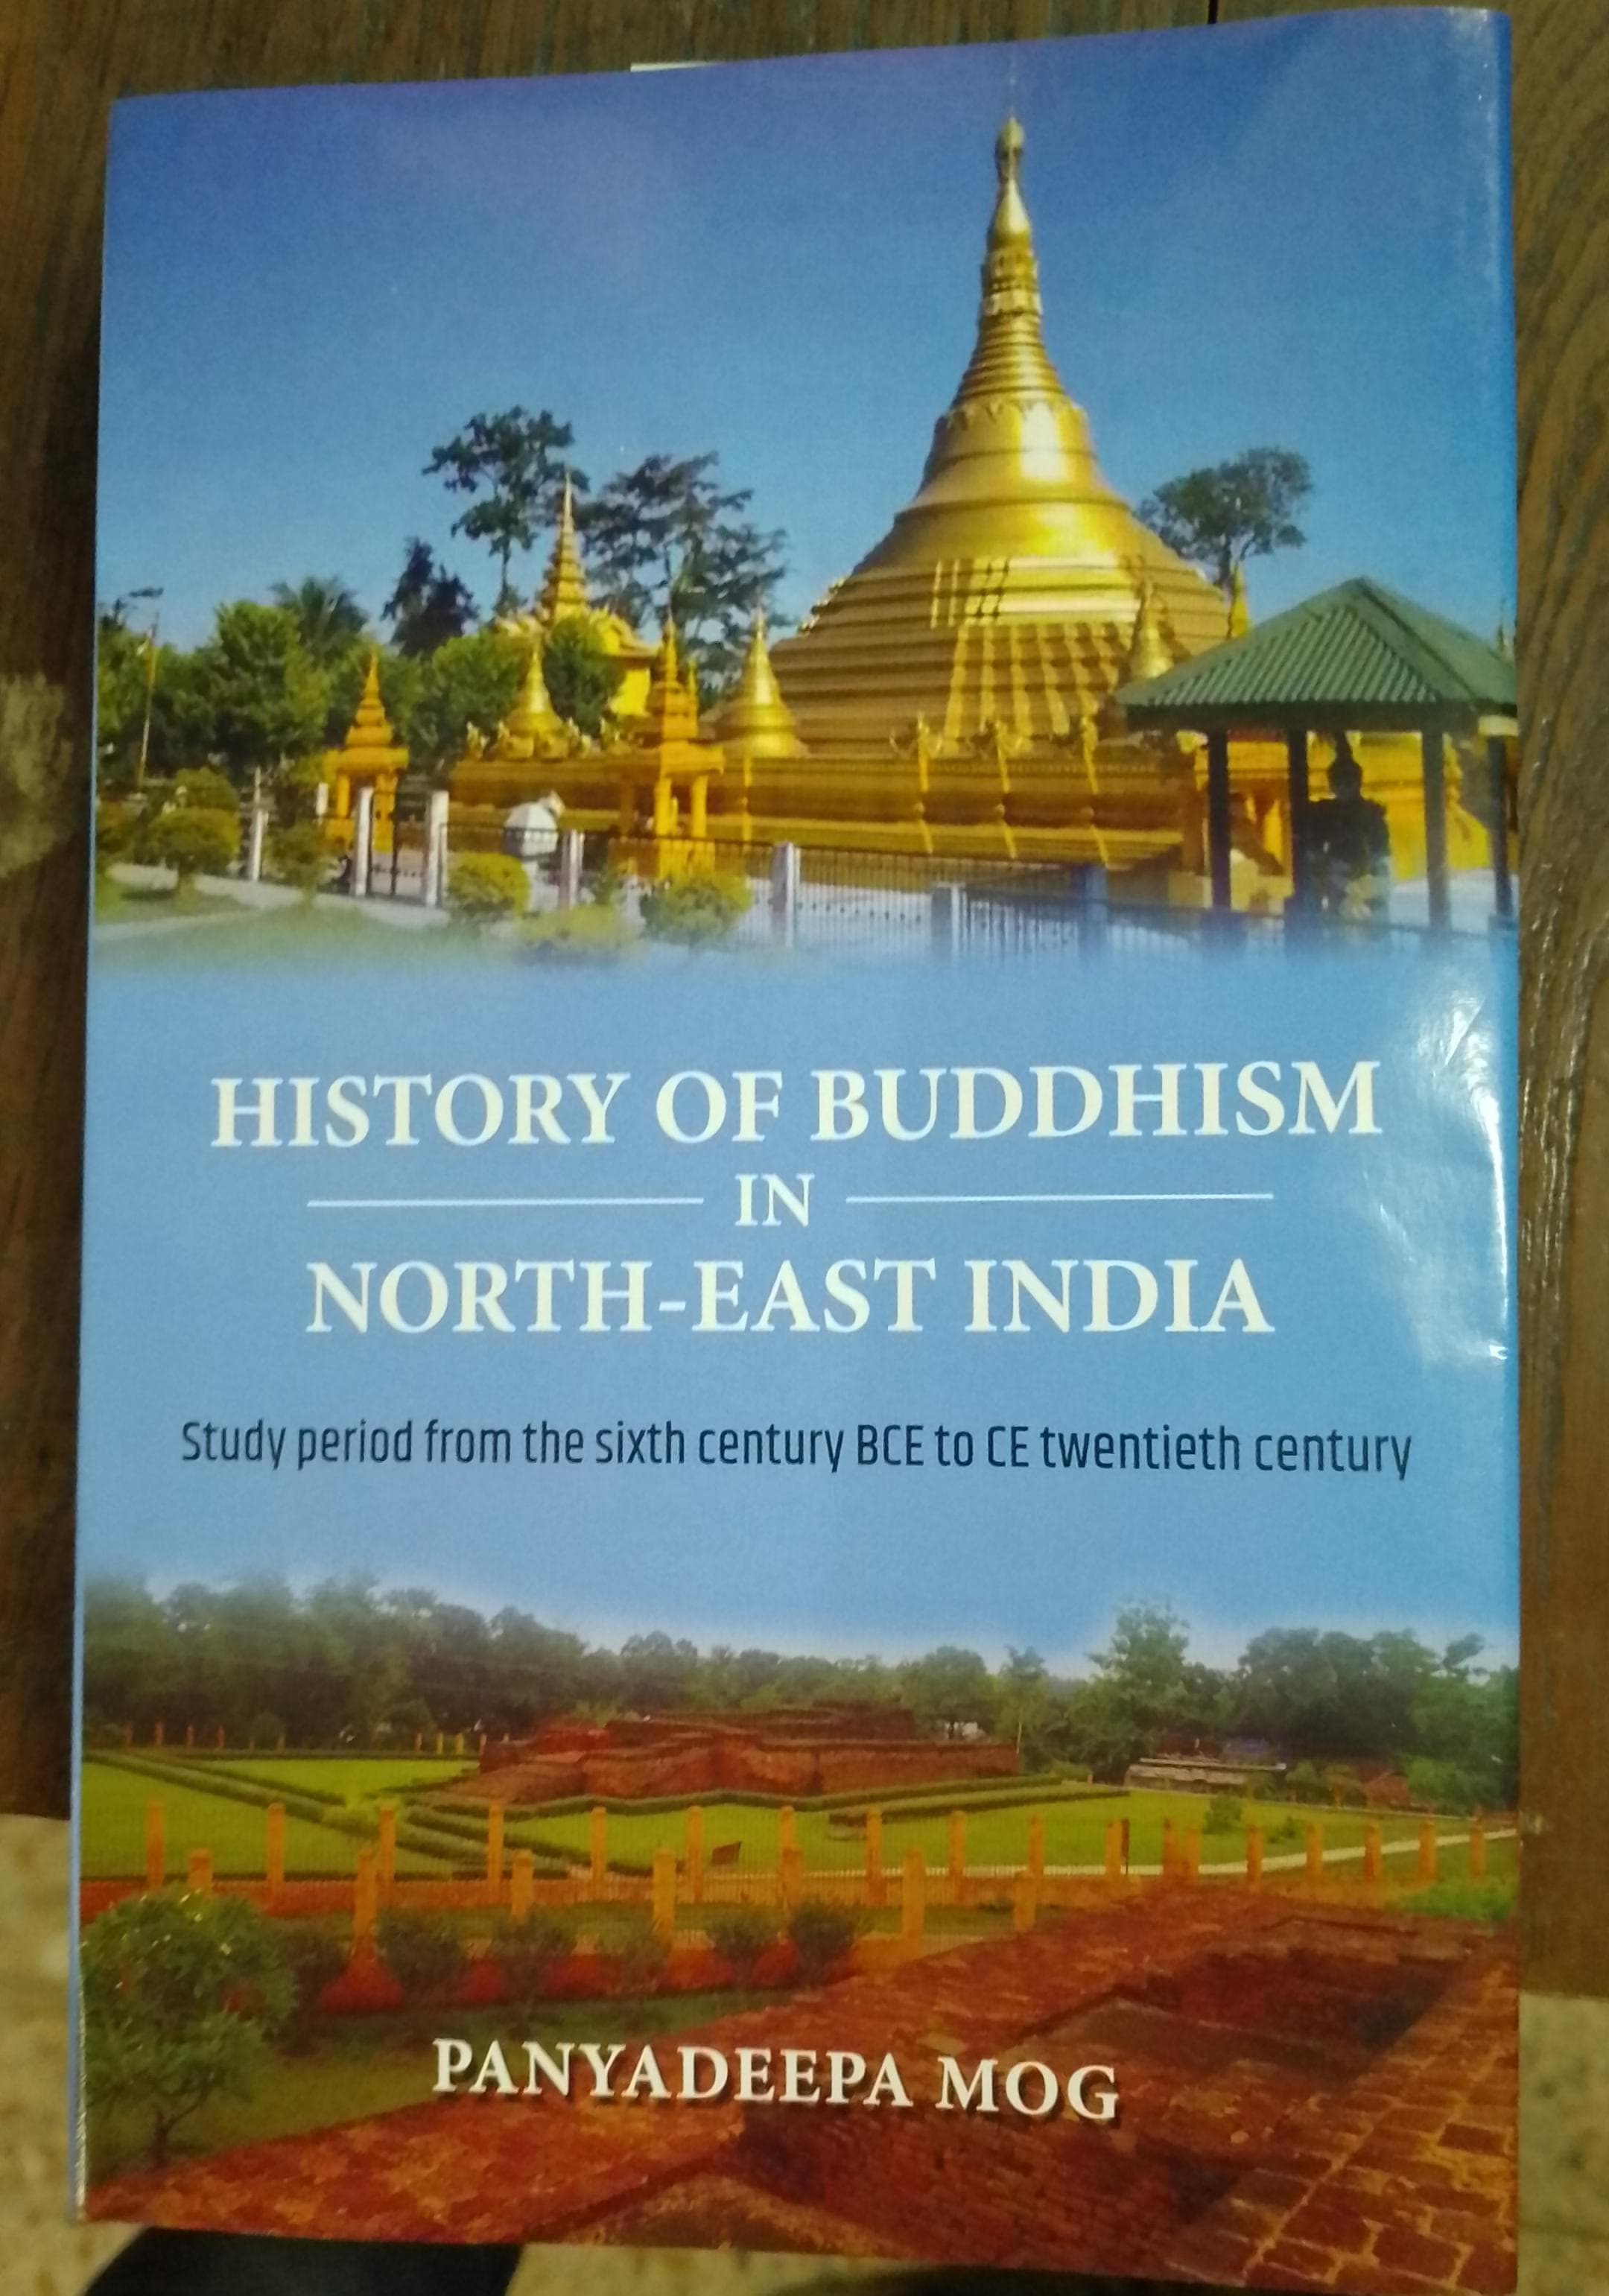 History of Buddhism in North-East India, Study period from the sixth century BCE to CE twentieth century